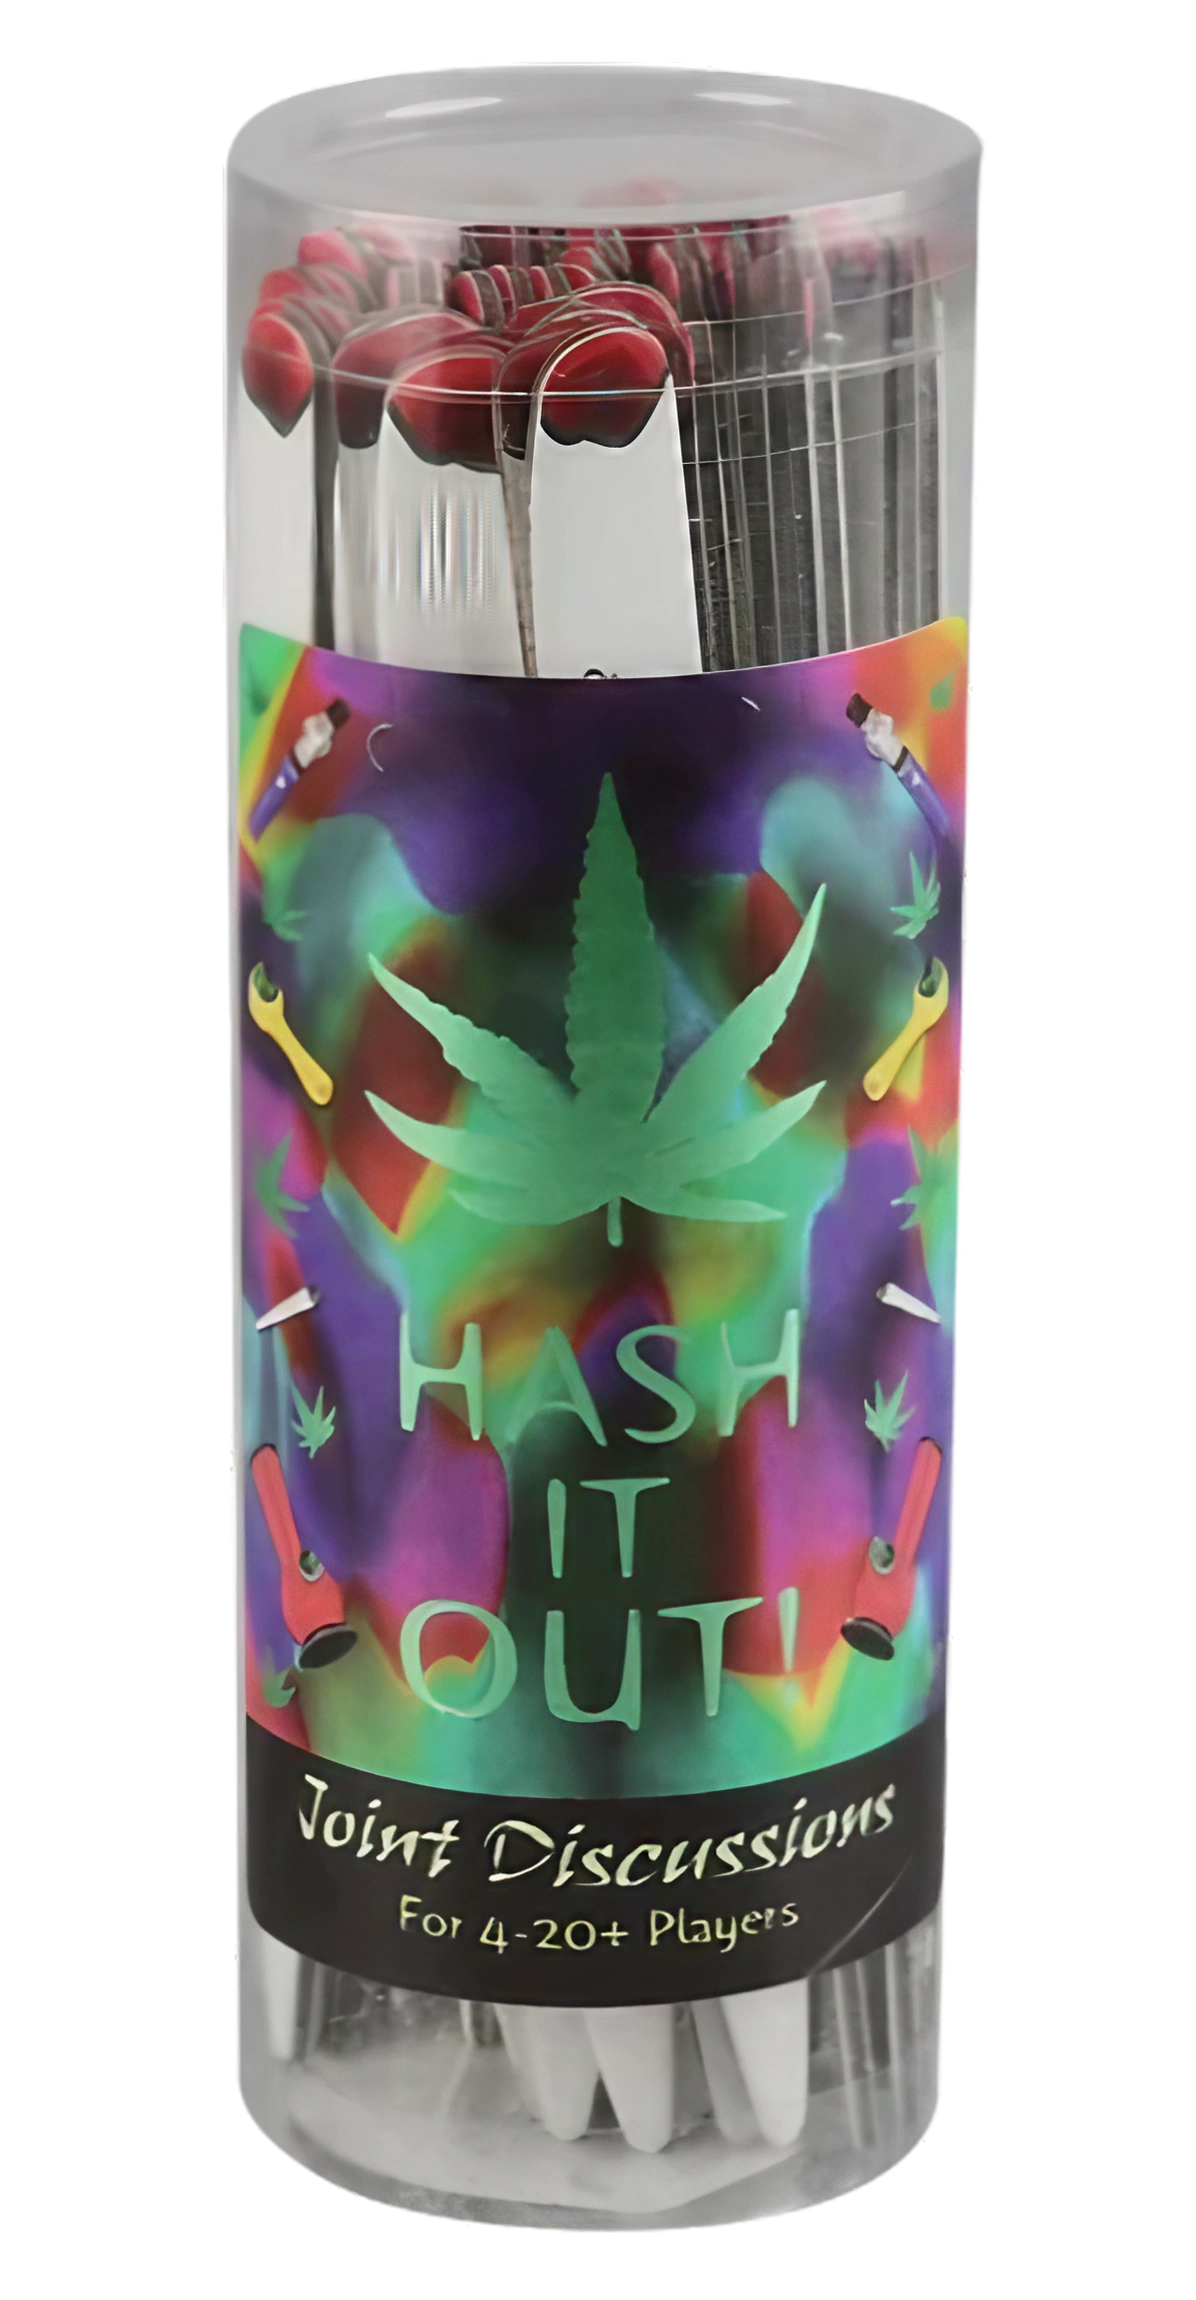 Hash It Out! Joint Discussion Game for parties, front view of colorful packaging